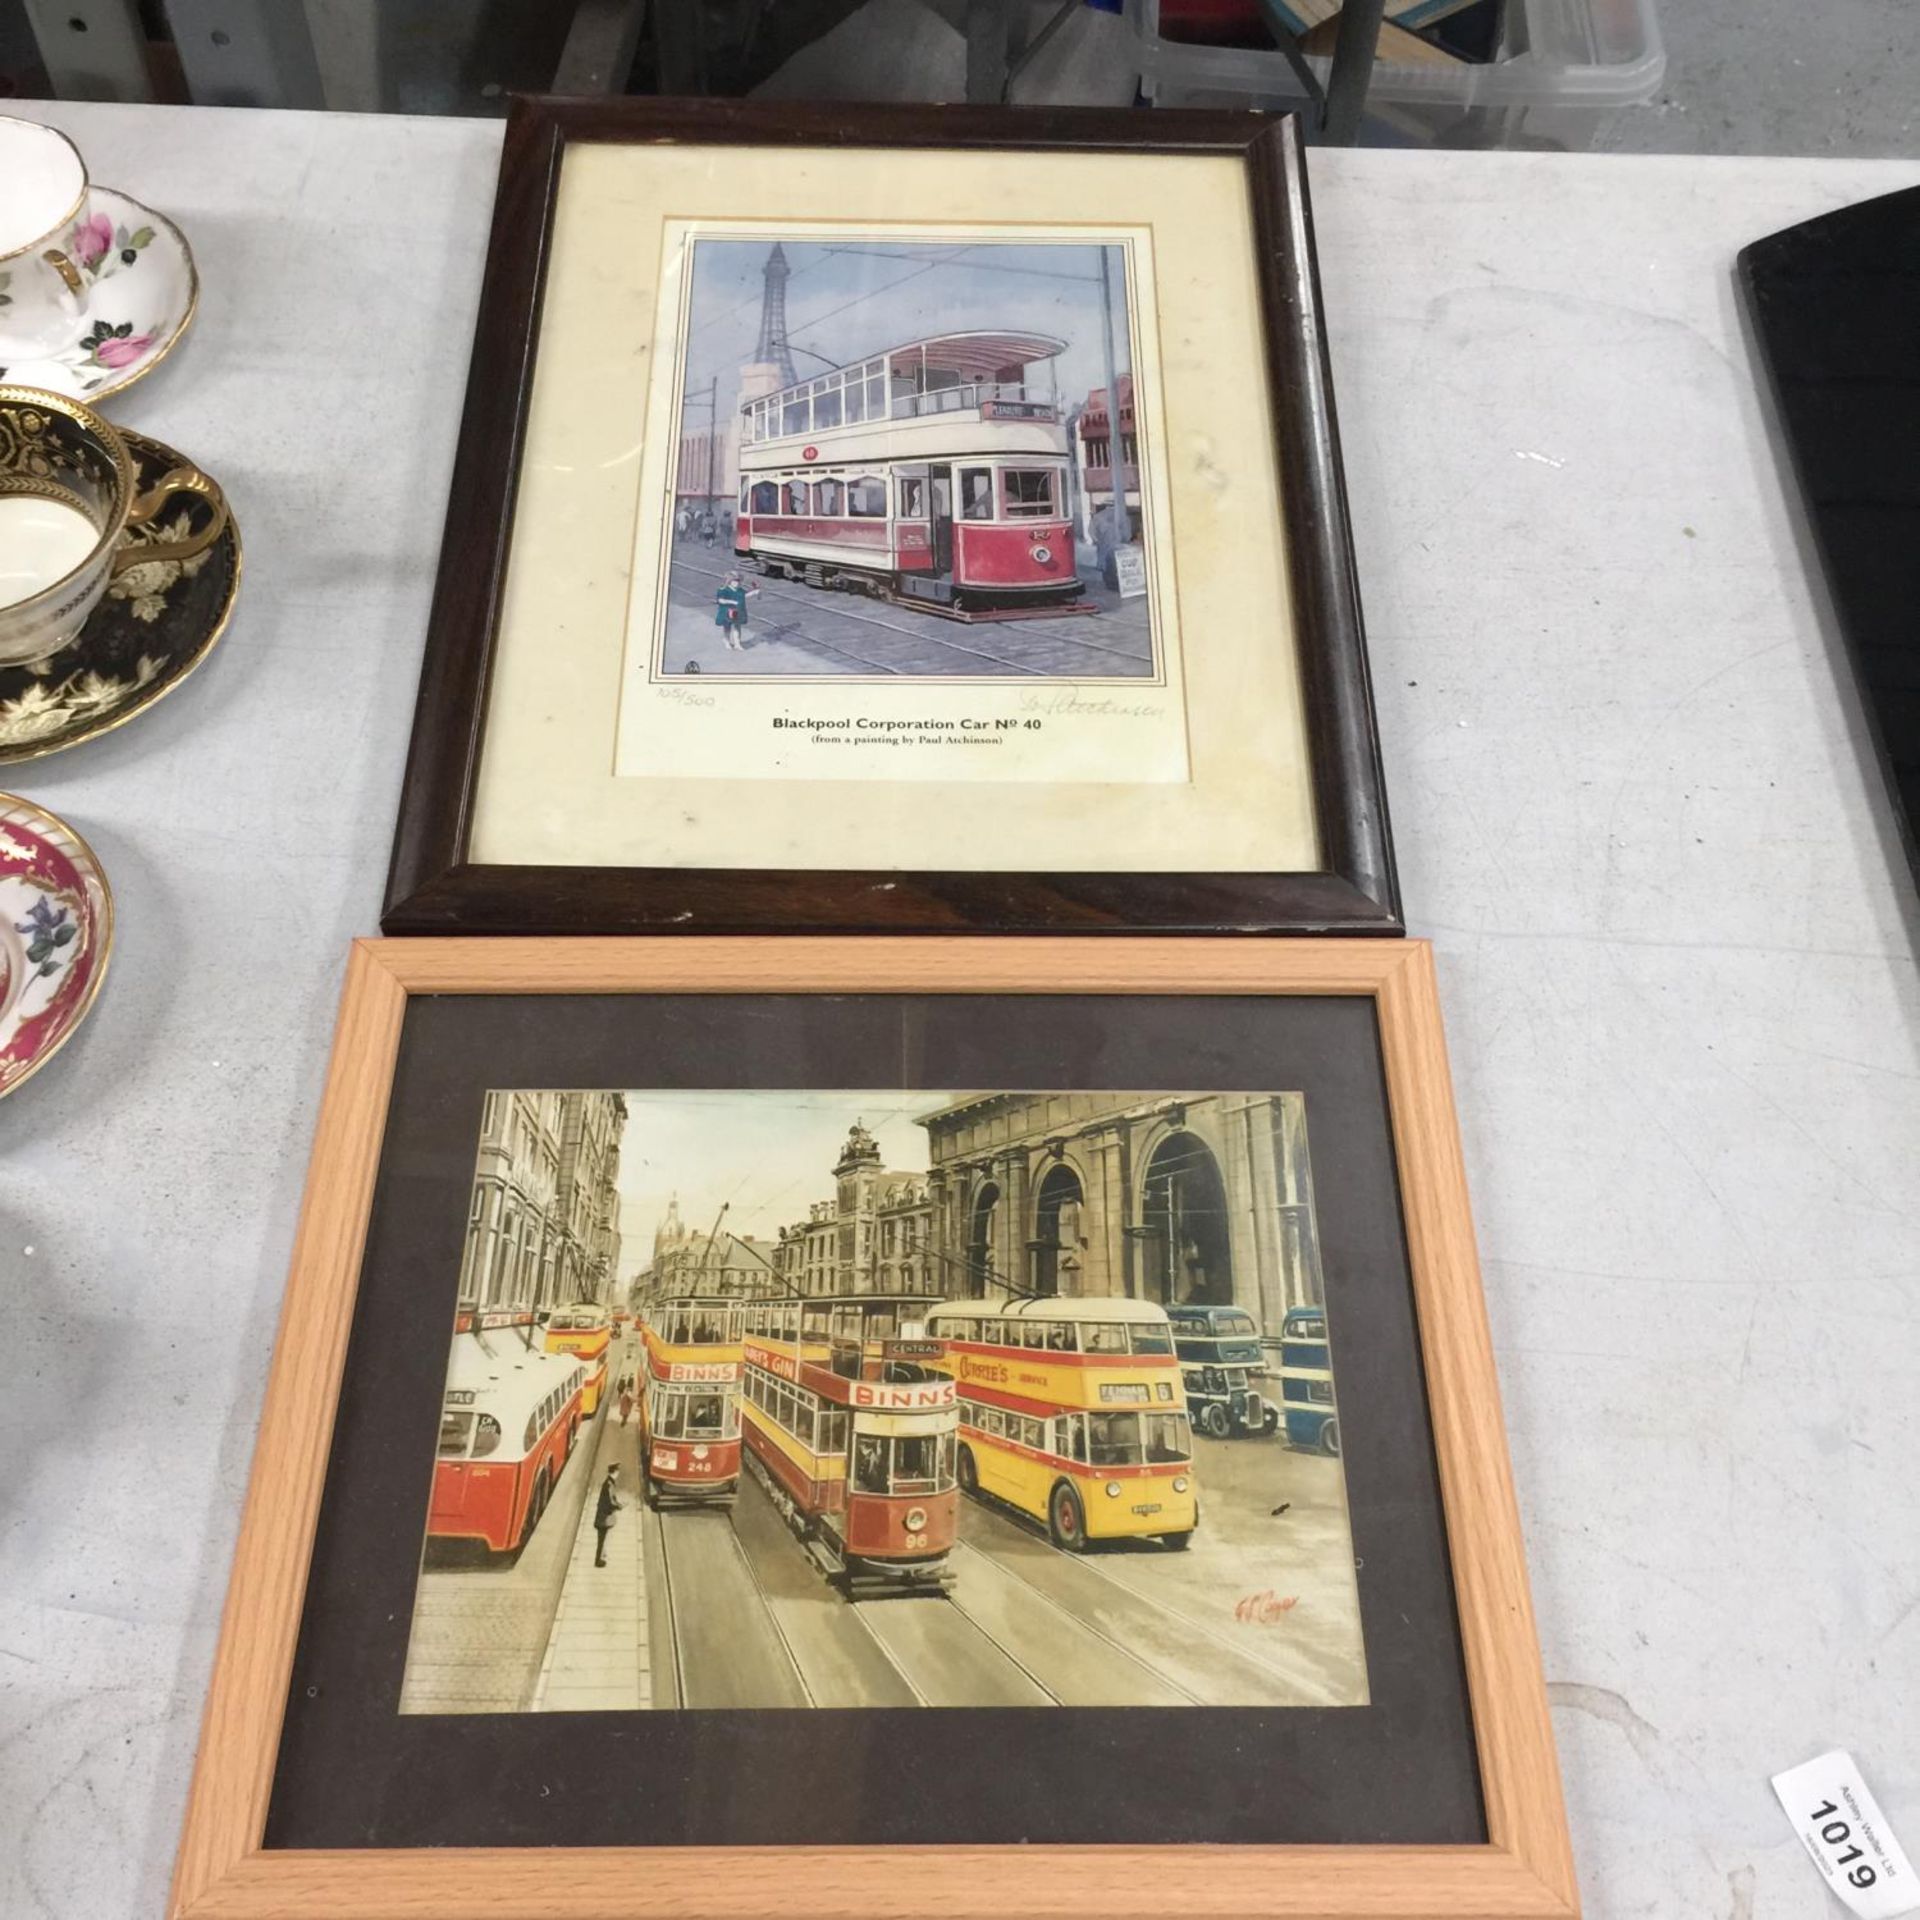 TWO VINTAGE STYLE PRINTS - LIMITED EDITION 105/500 'BLACKPOOL CORPORATION CAR NO 40' SIGNED PAUL